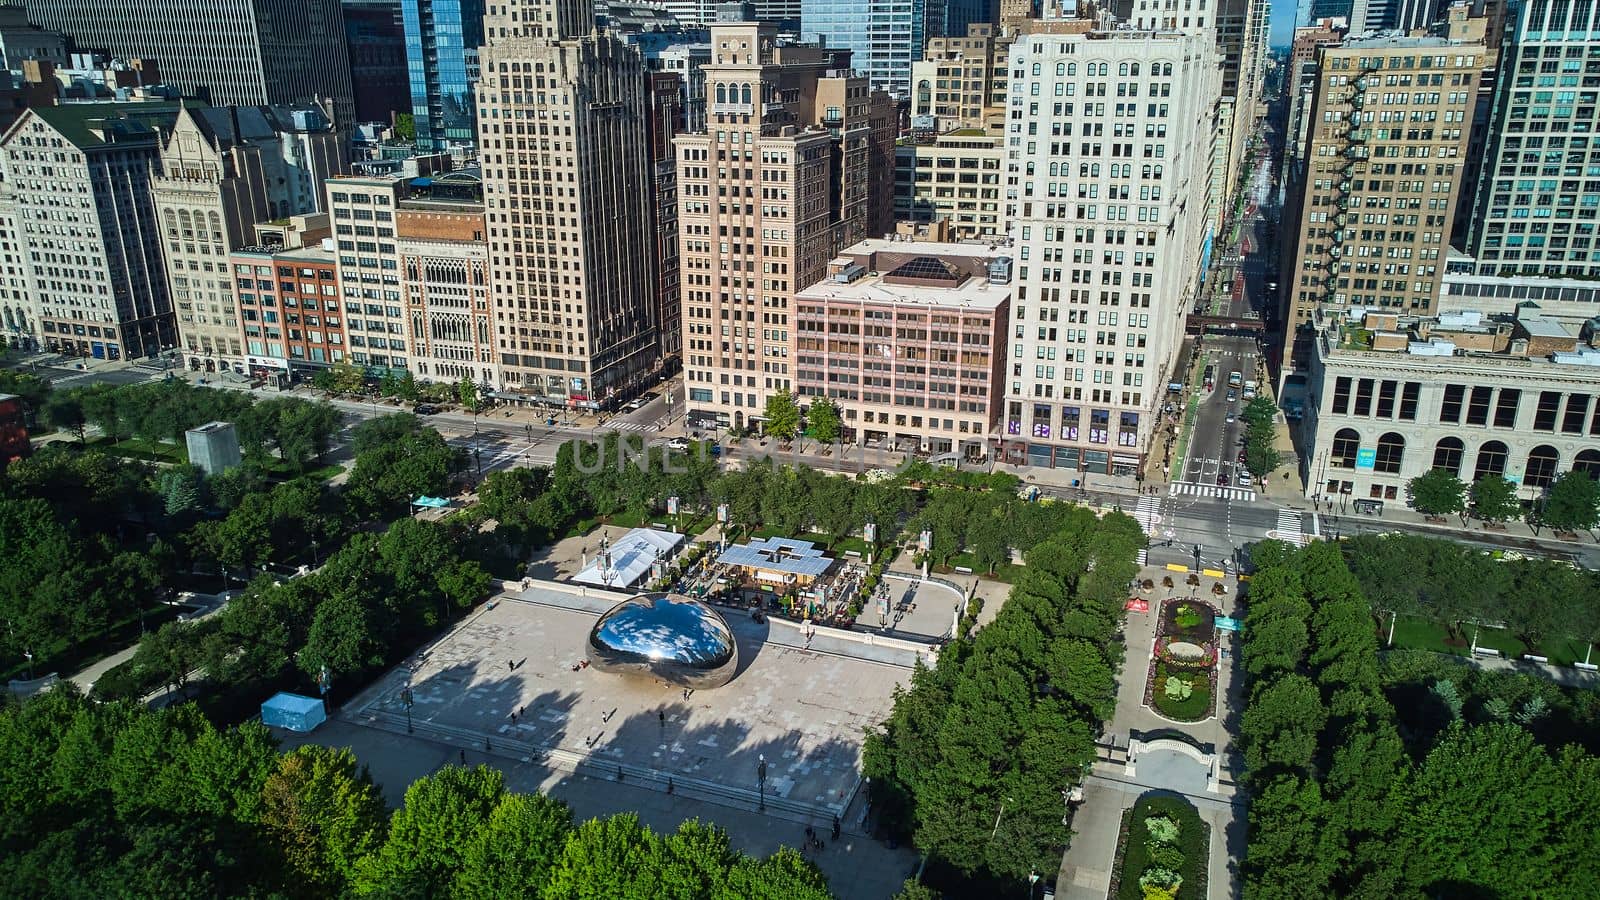 Chicago Millennium Park aerial view of iconic Cloud Gate Bean by skyscrapers by njproductions